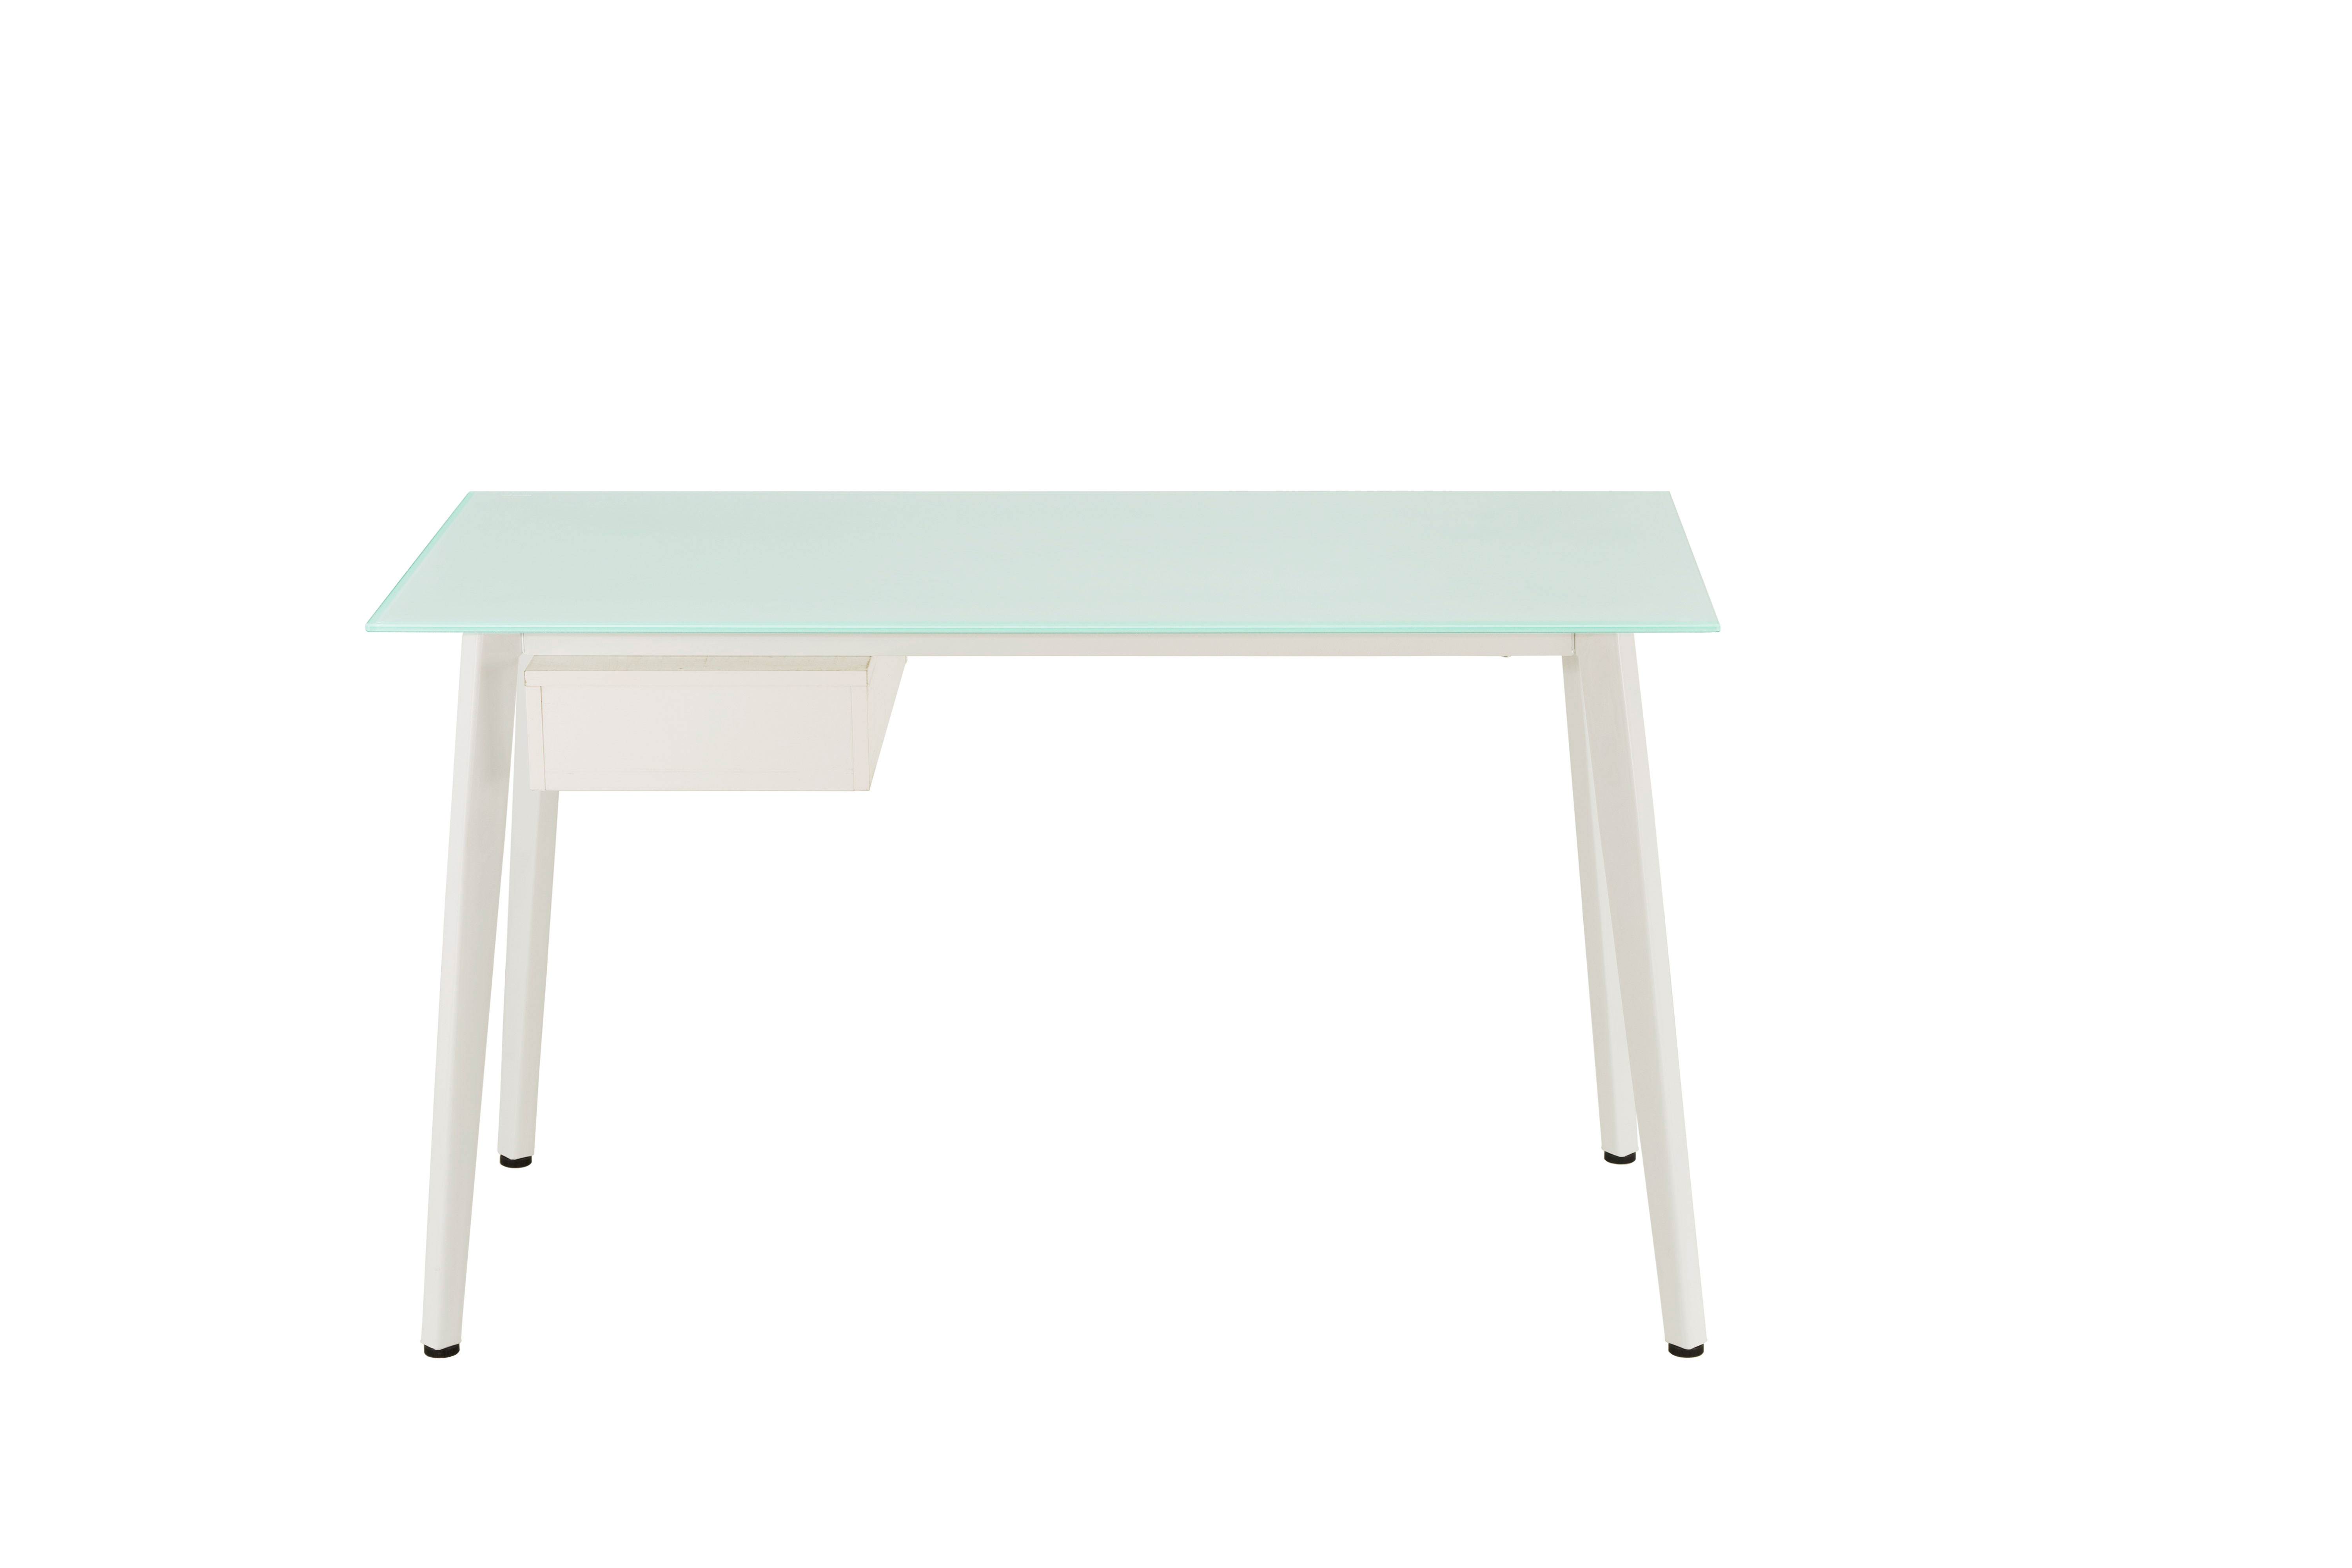 SUPERLIVING COMPUTER TABLE 130X60X76CM WHITE